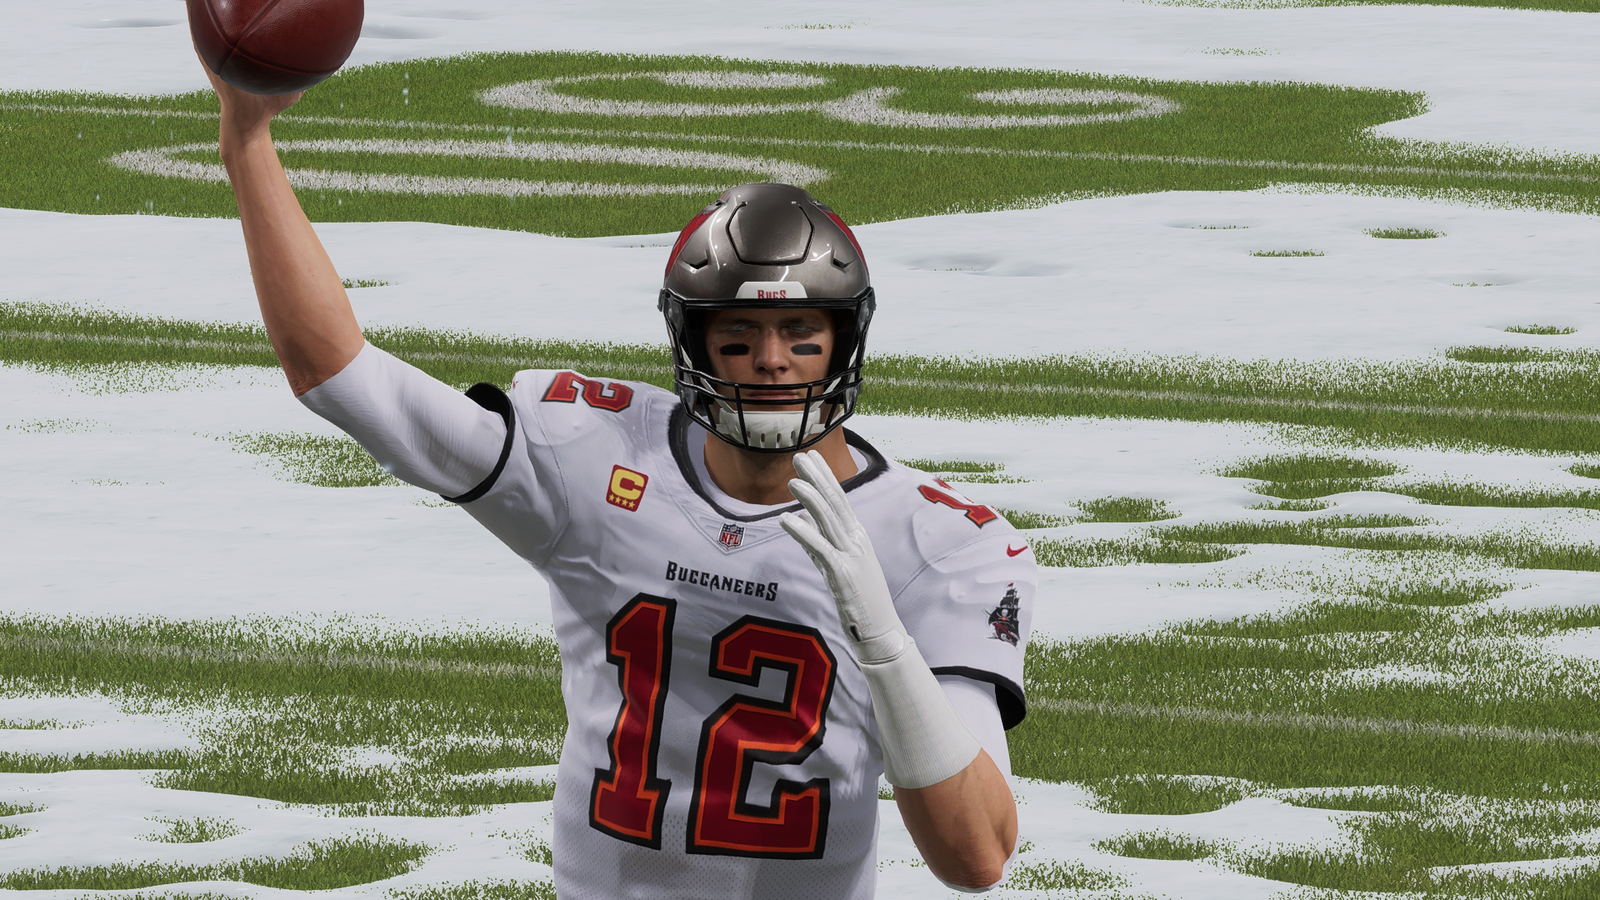 Tom Brady throwing a pass in Madden 22